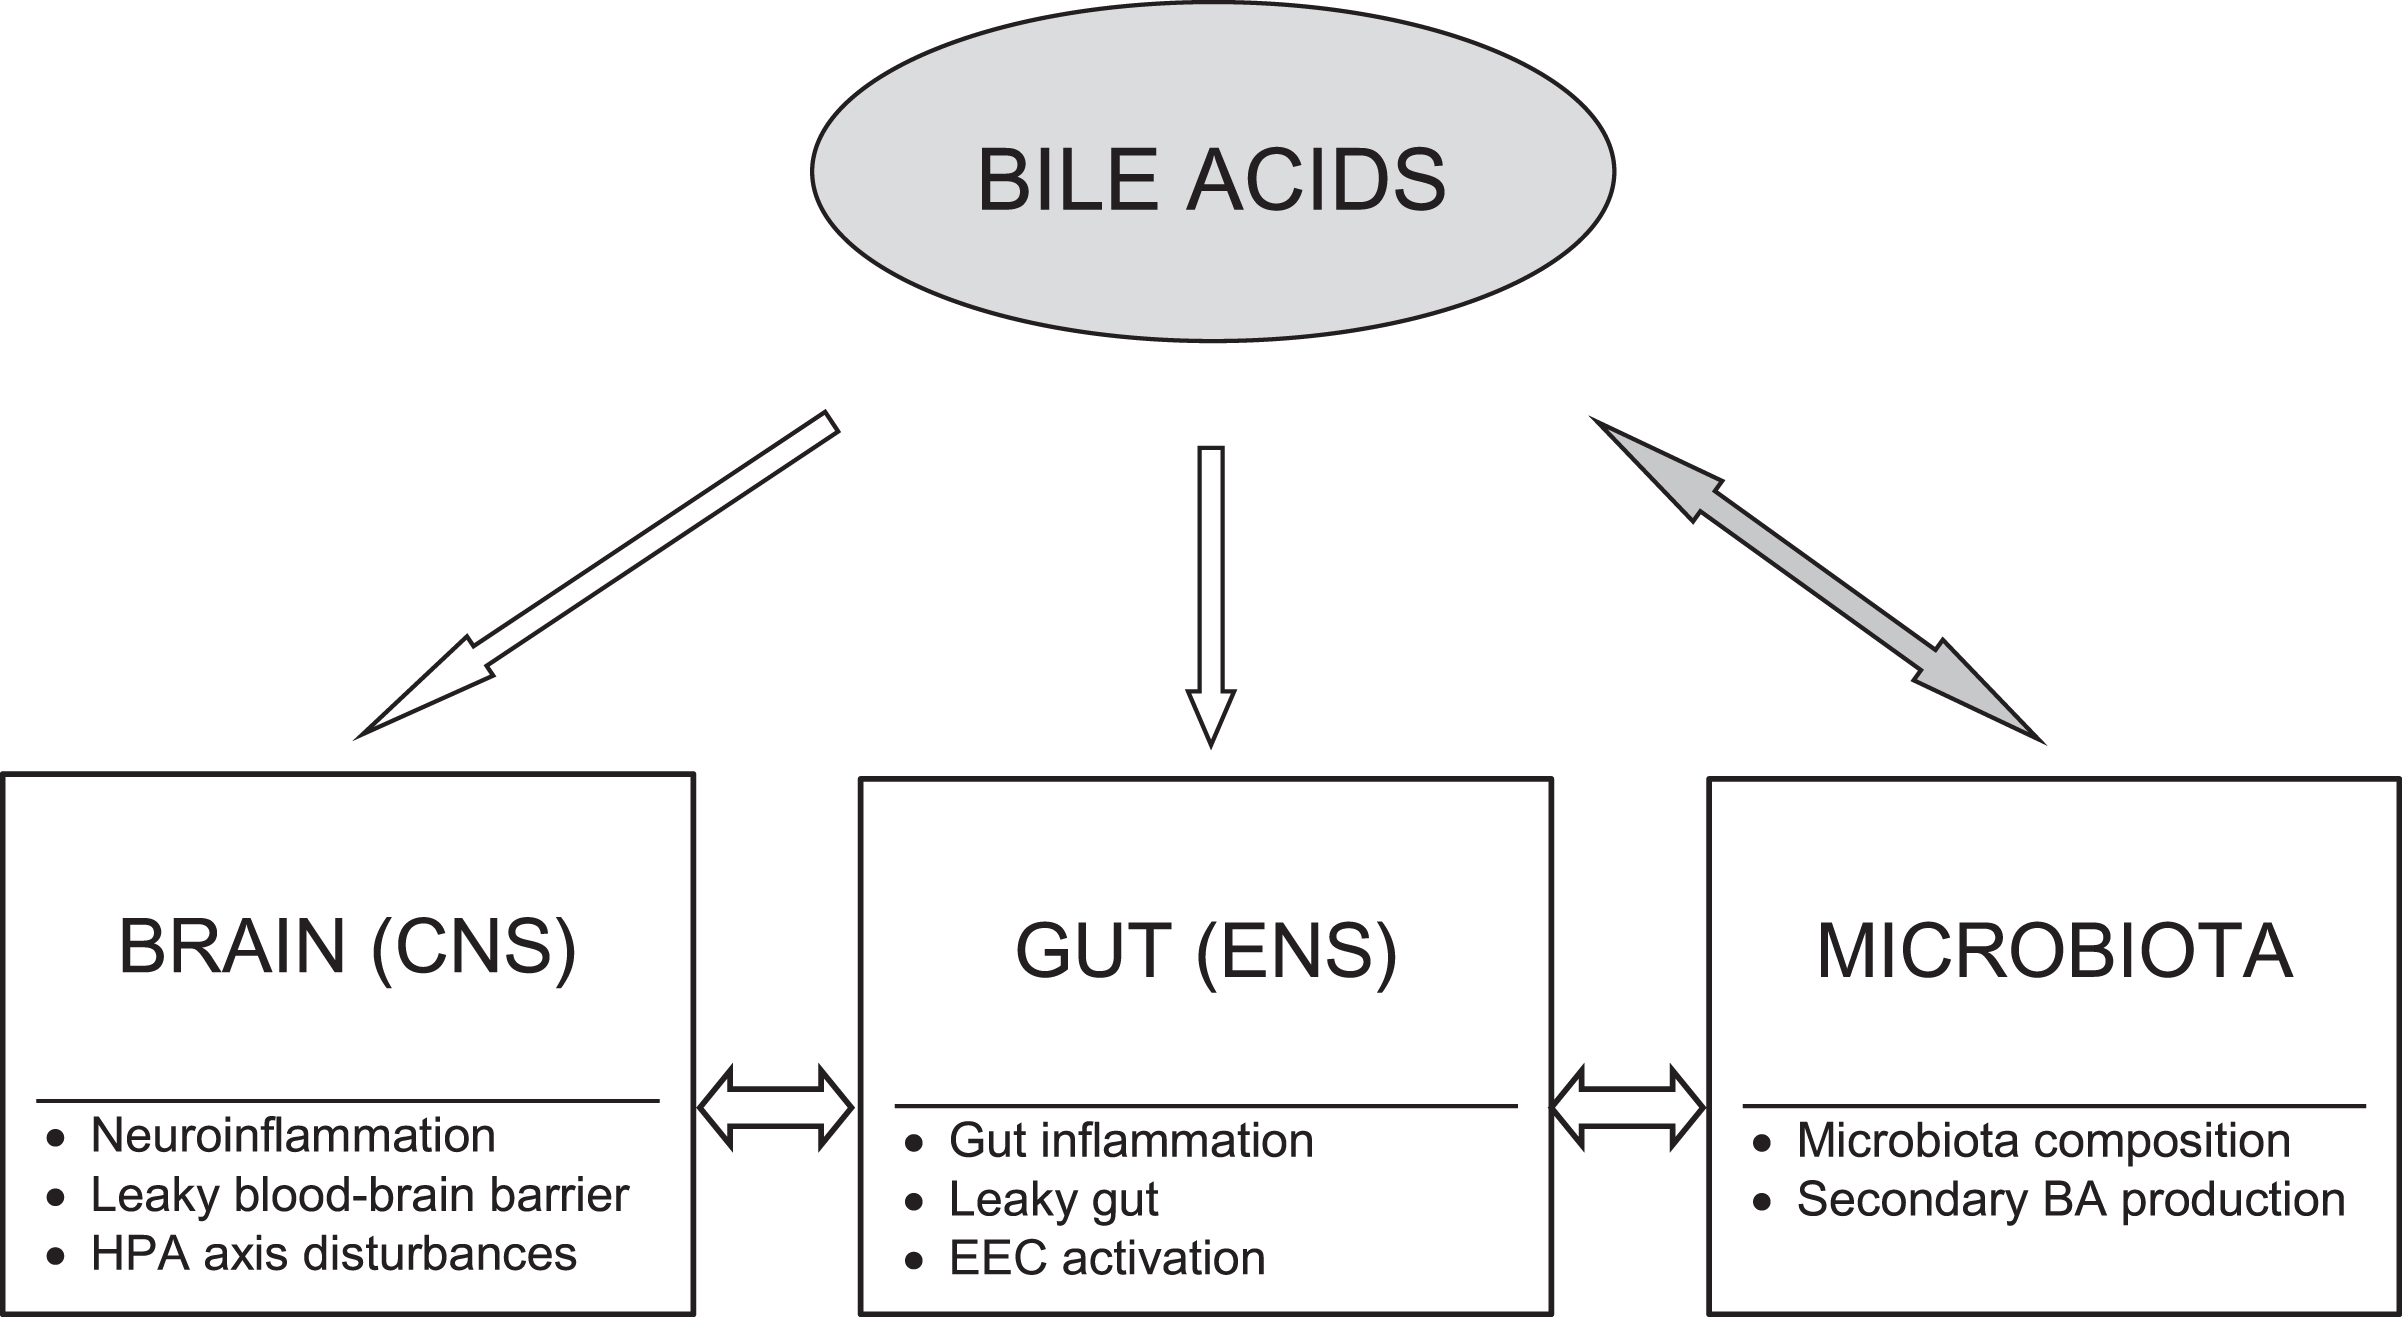 Bile acid modulatory effects on the brain-gut-microbiota axis in Alzheimer’s disease. Bile acids (BAs) may act as modulators of each level of the brain-gut-microbiota axis. There are bidirectional interactions between gut microbiota and BAs. The BA pool composition depends on gut microbiota producing secondary BAs, whereas BAs significantly influence microbiota composition. The primary to secondary BA ratio determines their signaling due to diversified binding affinities of BAs to various receptors. BAs may modify activation of both peripheral and central neural and immune cells as well as affect gut barrier and blood-brain barrier permeability. Moreover, BAs through their receptors exert neuroendocrine effects via enteroendocrine cells (EEC) and the hypothalamic-pituitary-adrenal (HPA) axis. CNS, central nervous system; ENS, enteric nervous system.